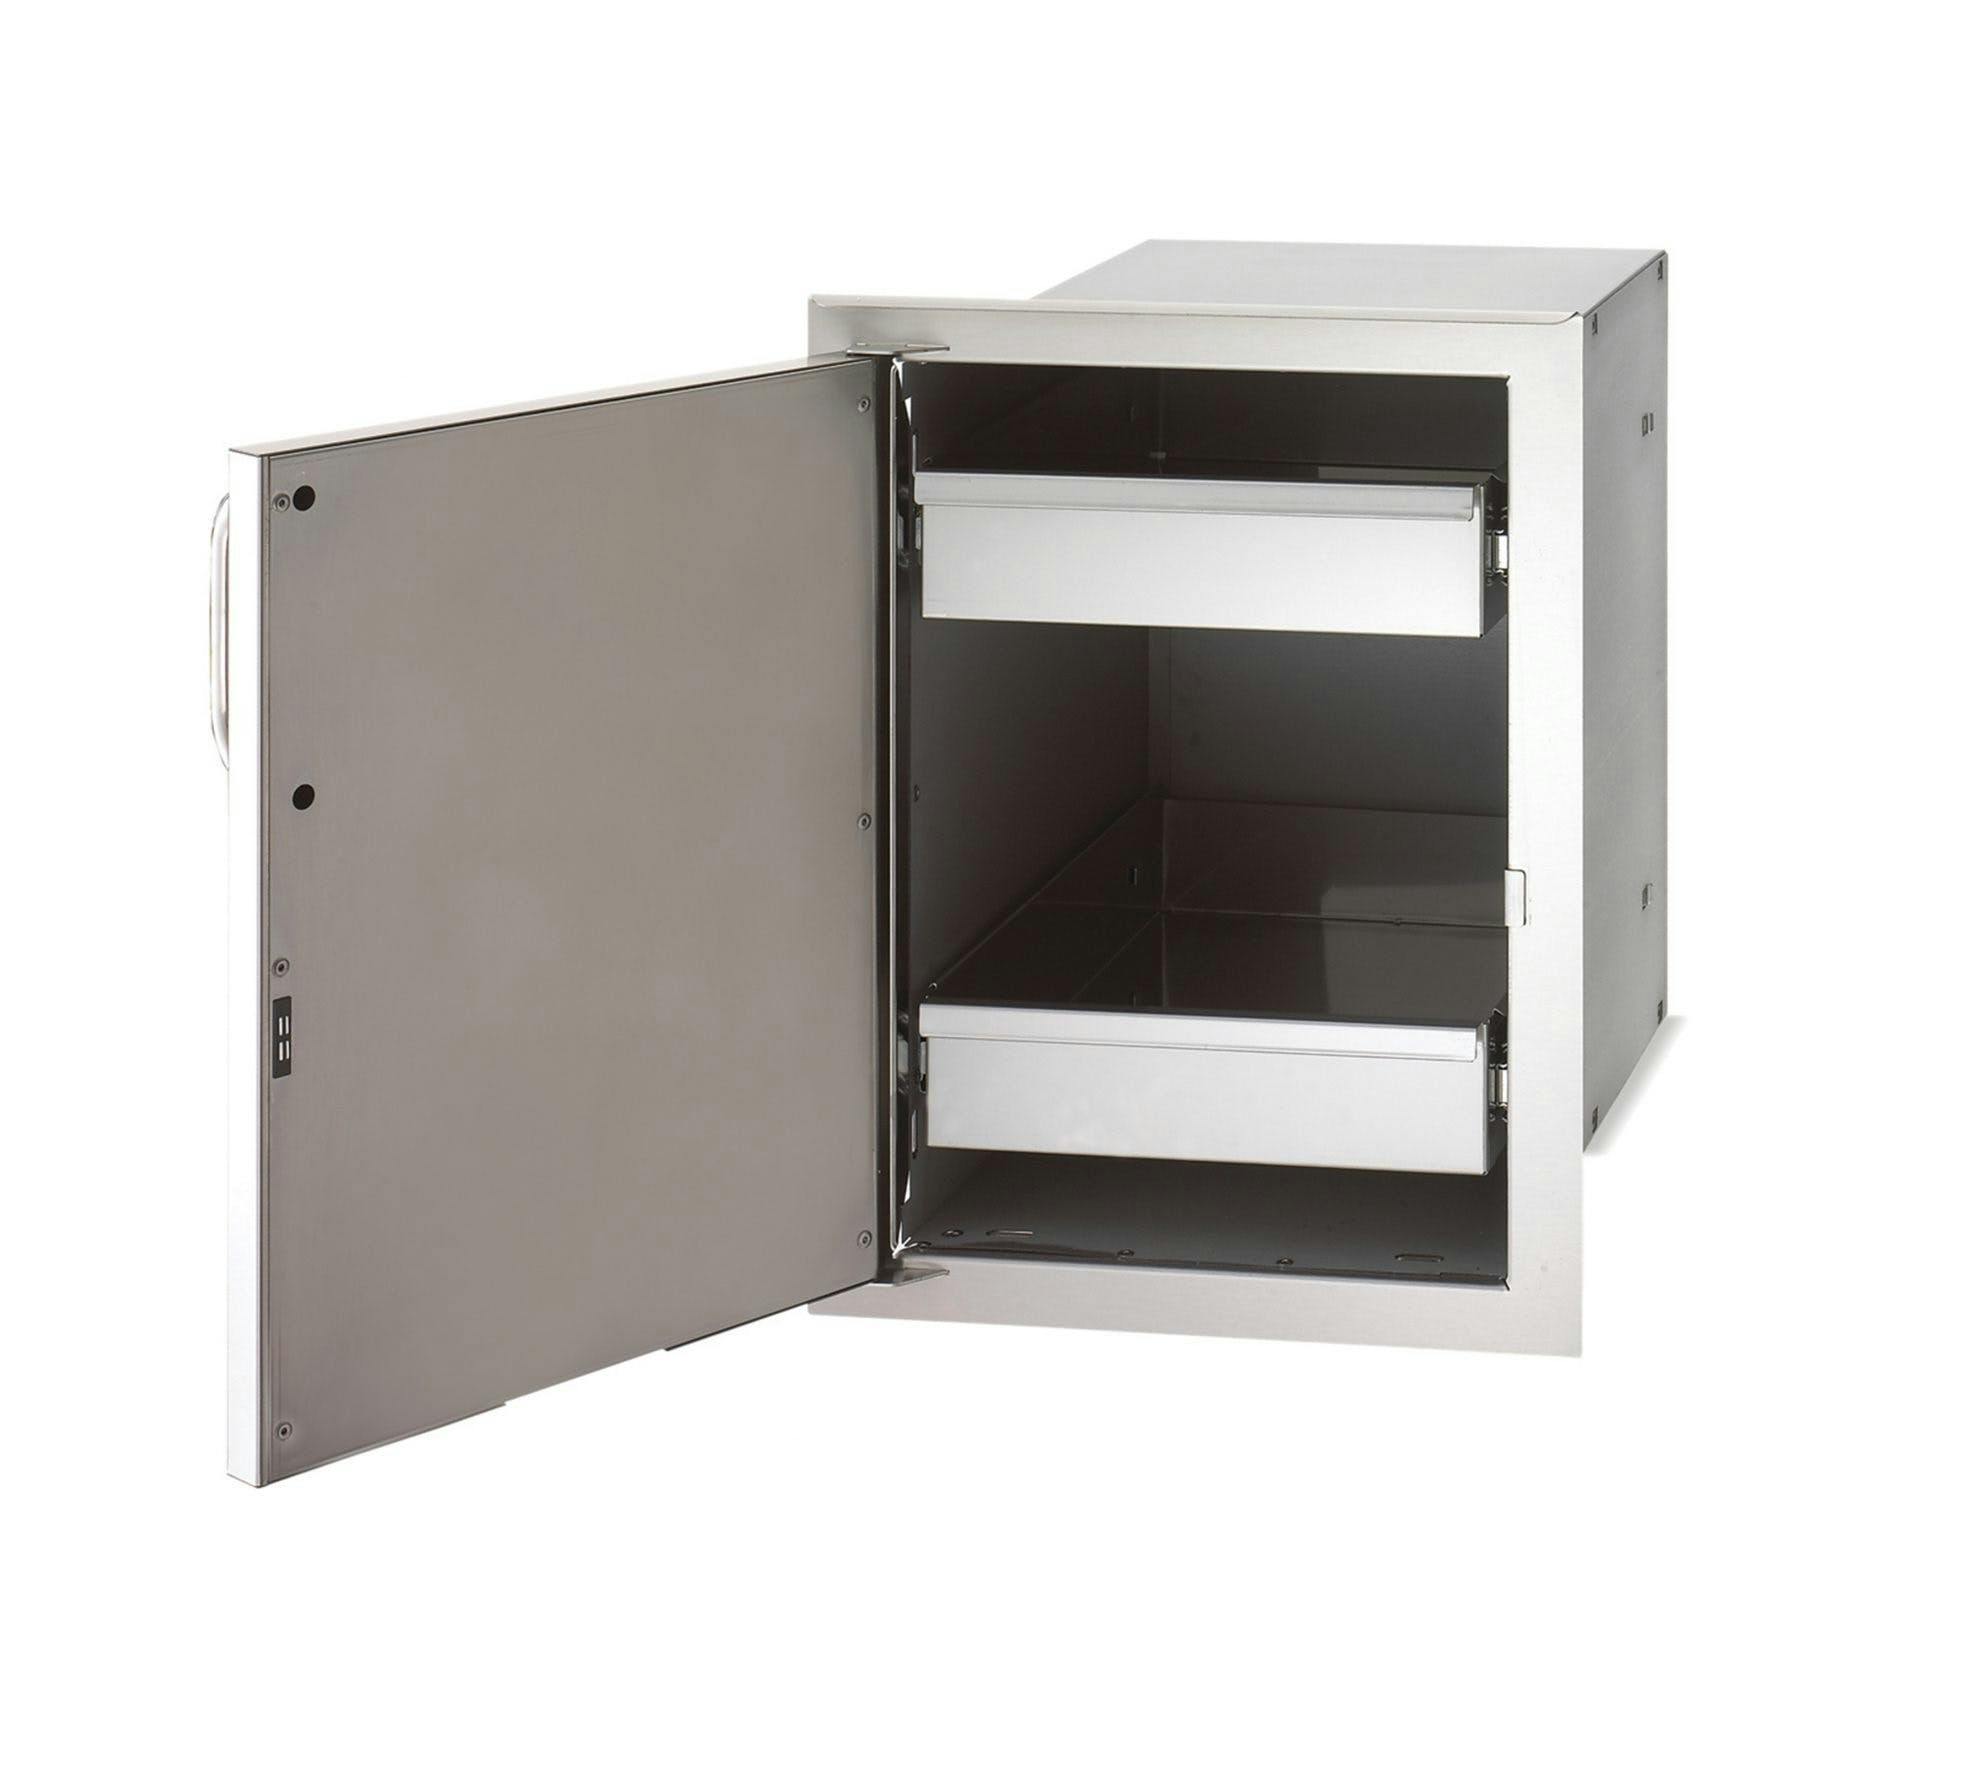 Fire Magic Select Enclosed Cabinet Storage with Drawers